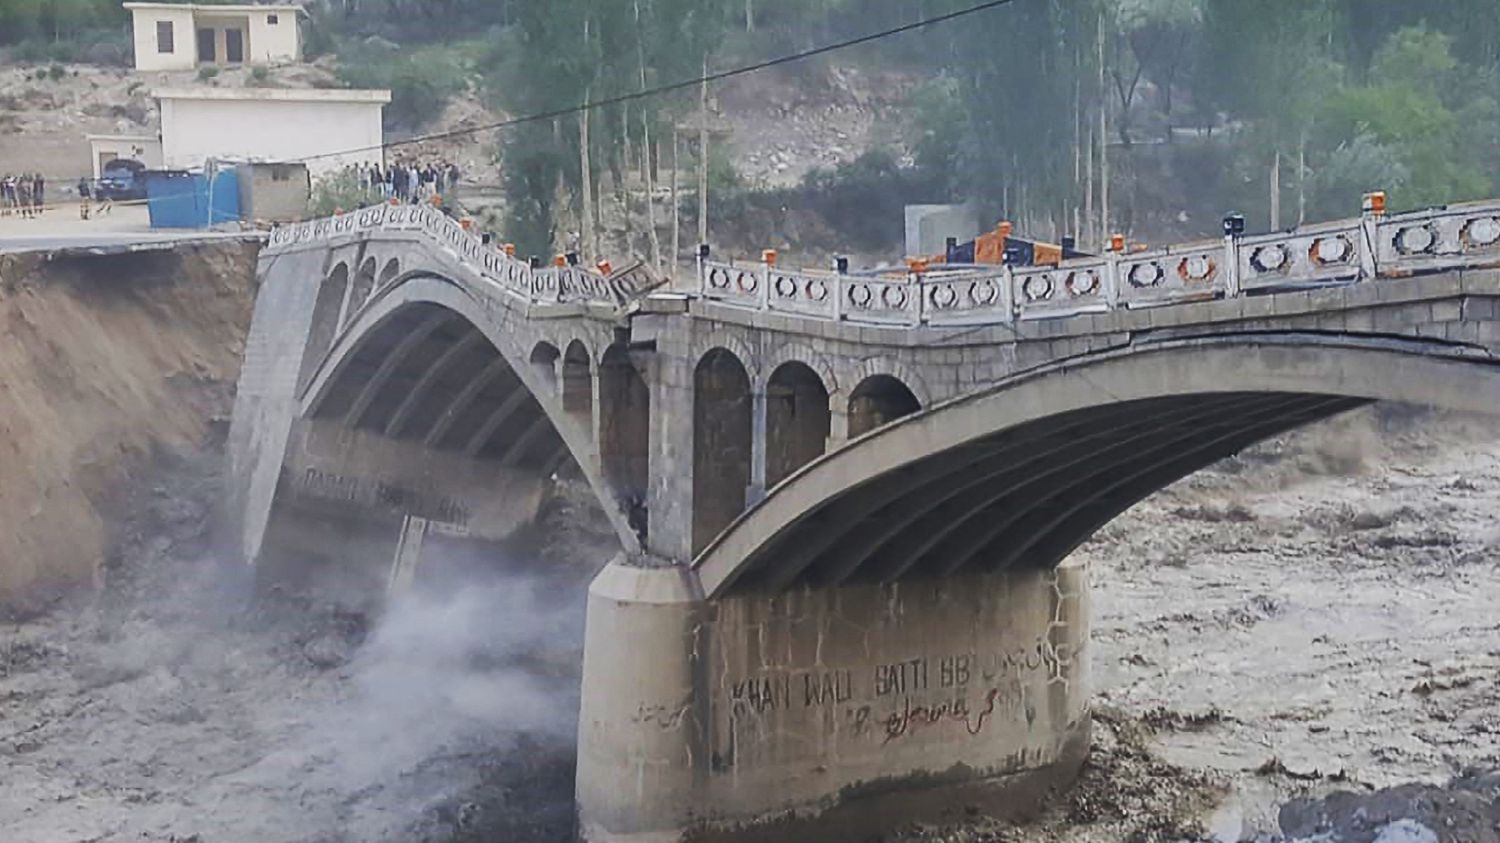 Climate crisis: flooding caused by heat wave destroys bridge in Pakistan
